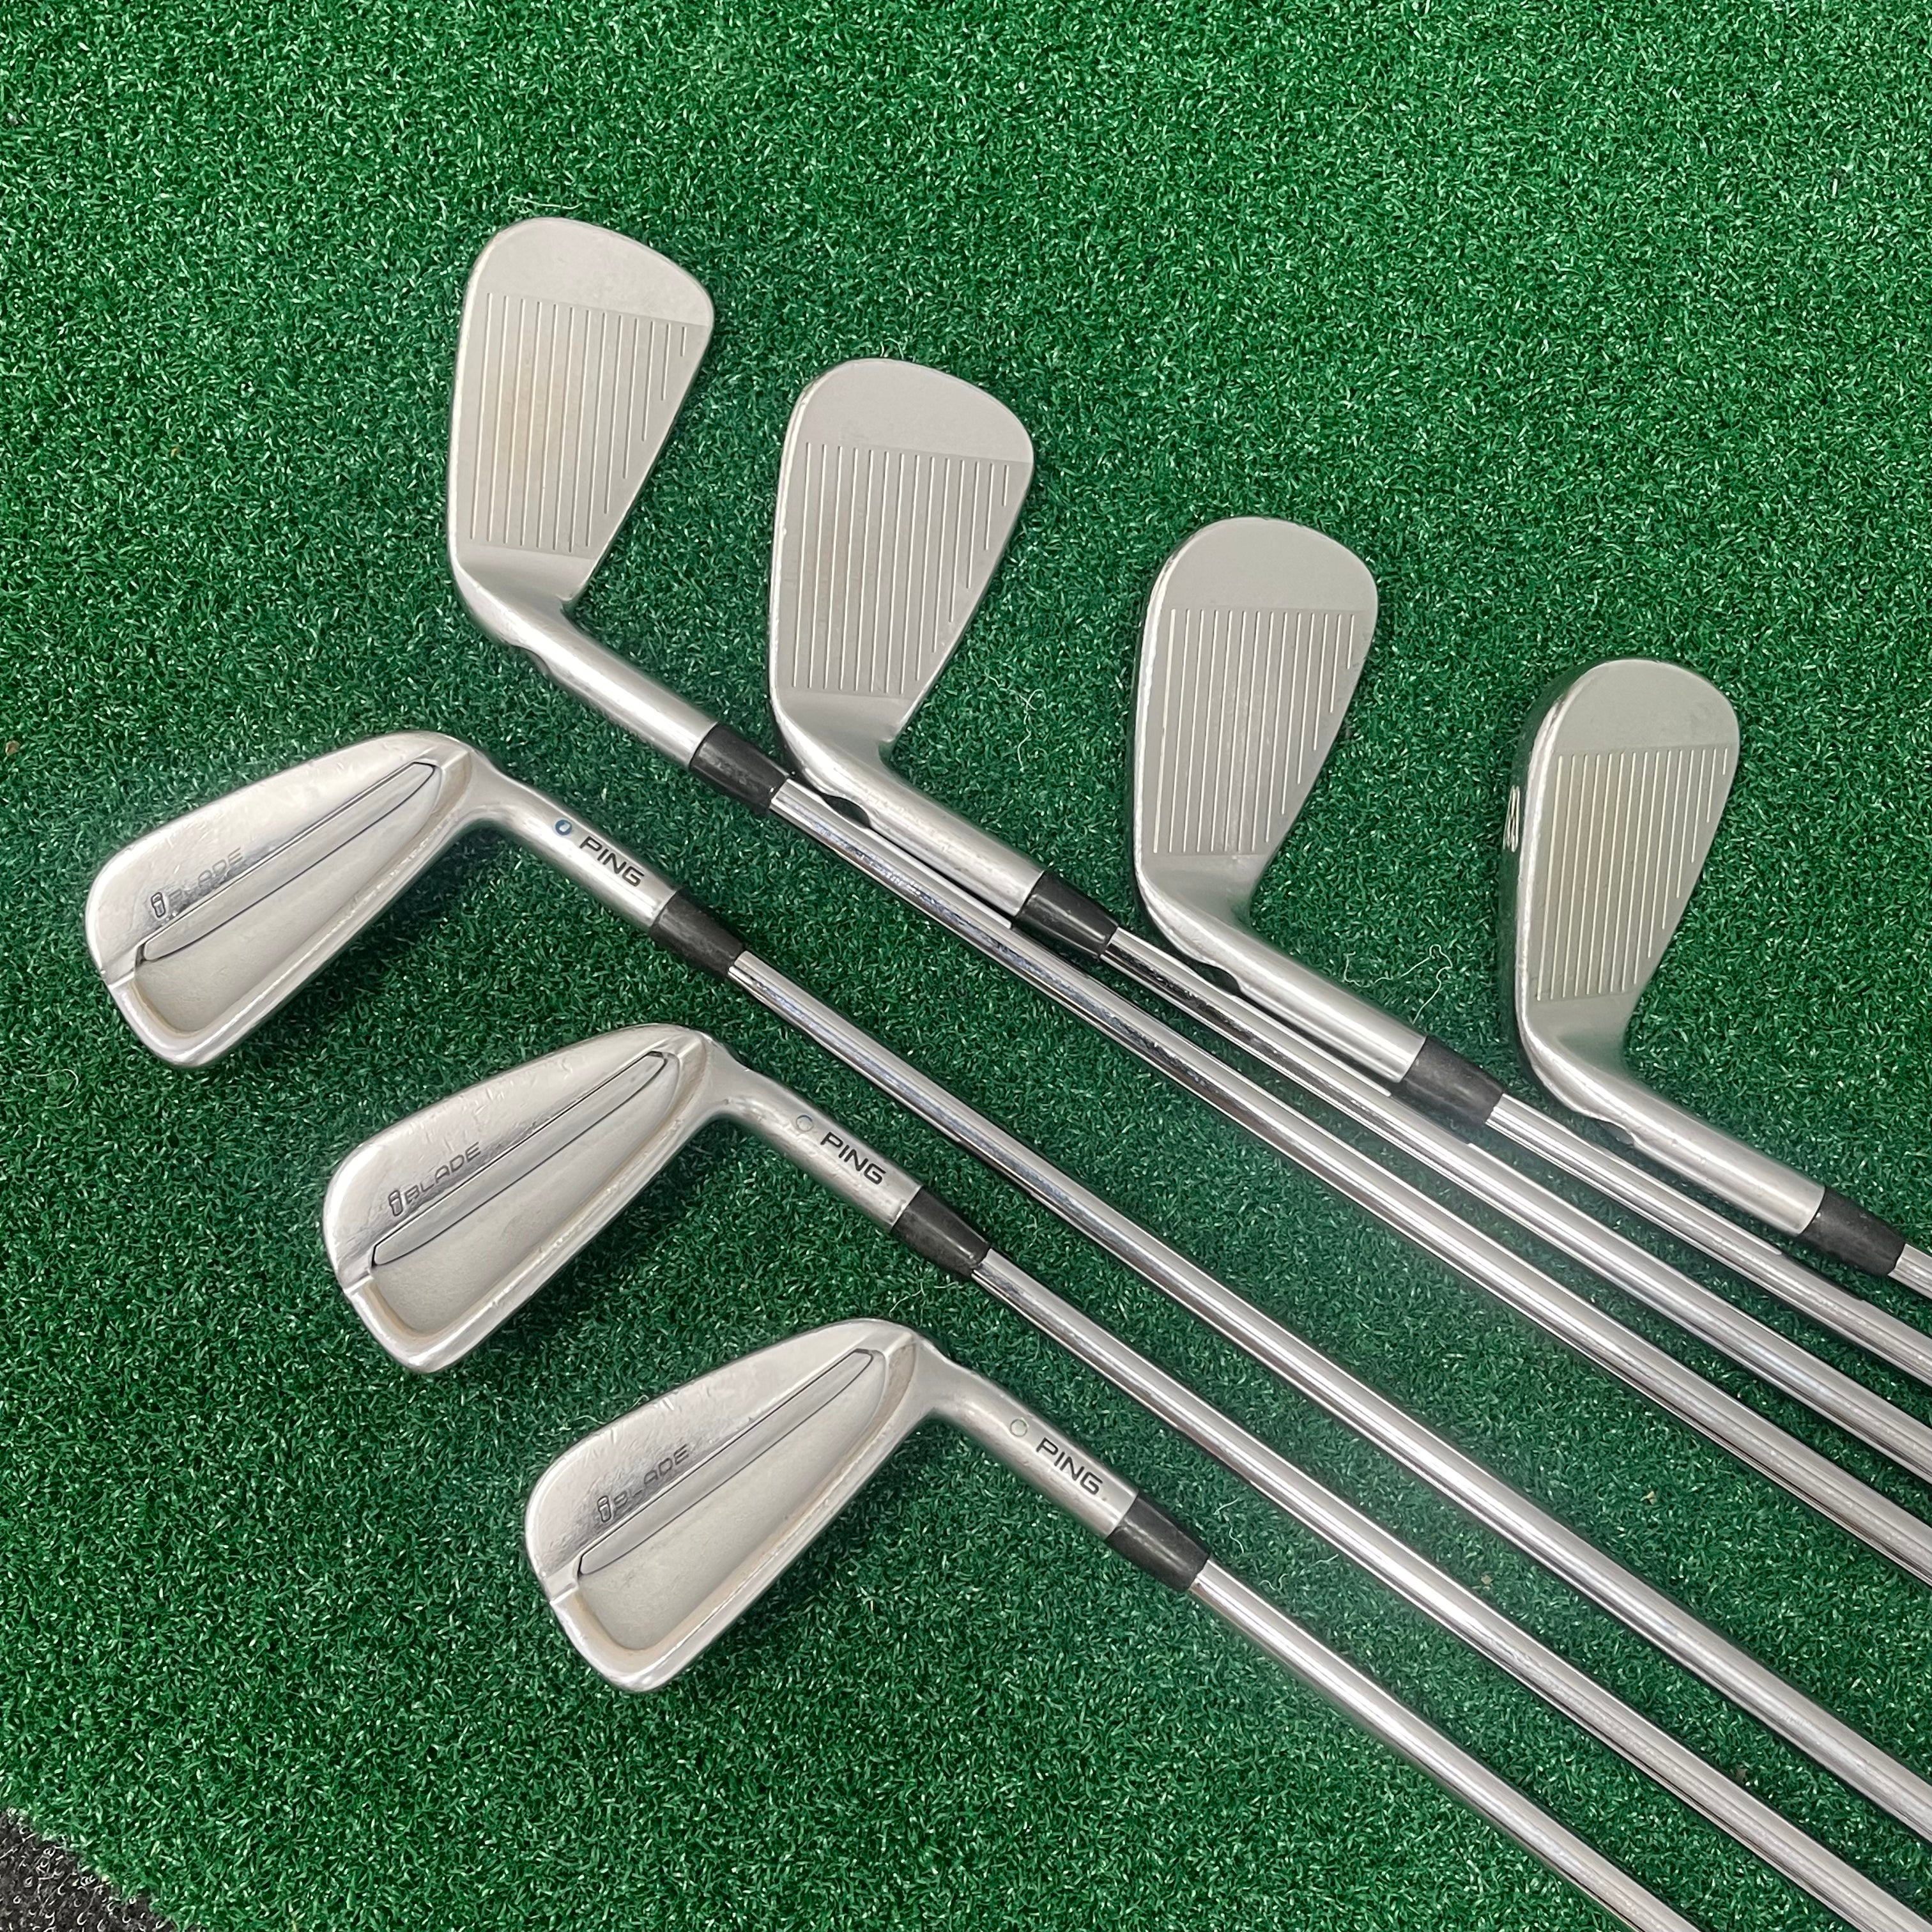 PING I-BLADE IRONS / 4-PW / PROJECT X 6.5 EXTRA STIFF SHAFTS